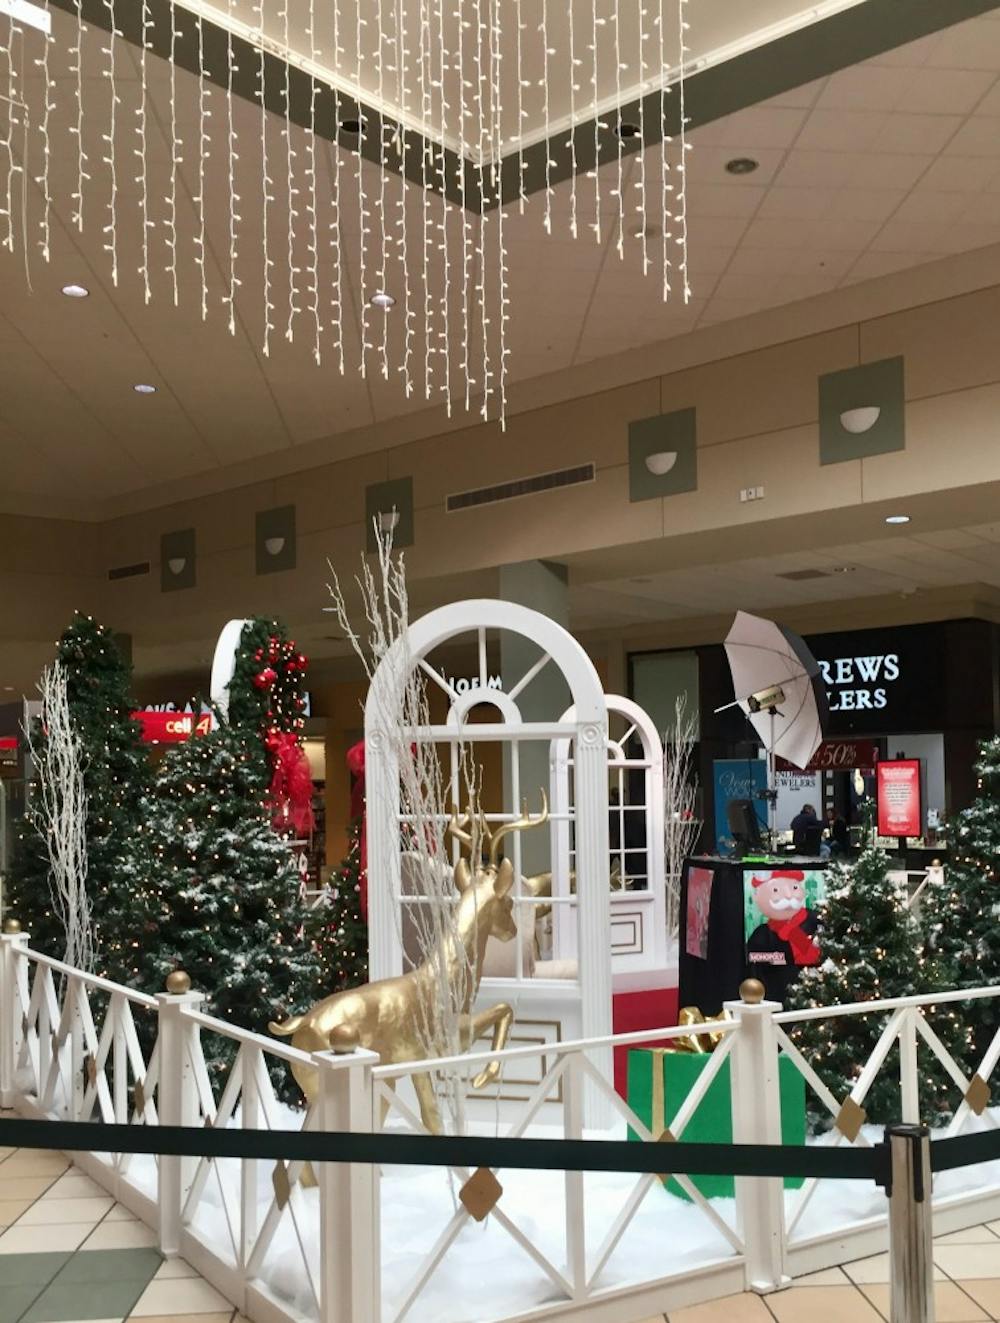 <p>Even though Christmas is still 40 days away, stores have already started setting up displays and holiday promotions.&nbsp;<em style="background-color: initial;">Samantha Brammer // DN&nbsp;</em></p>